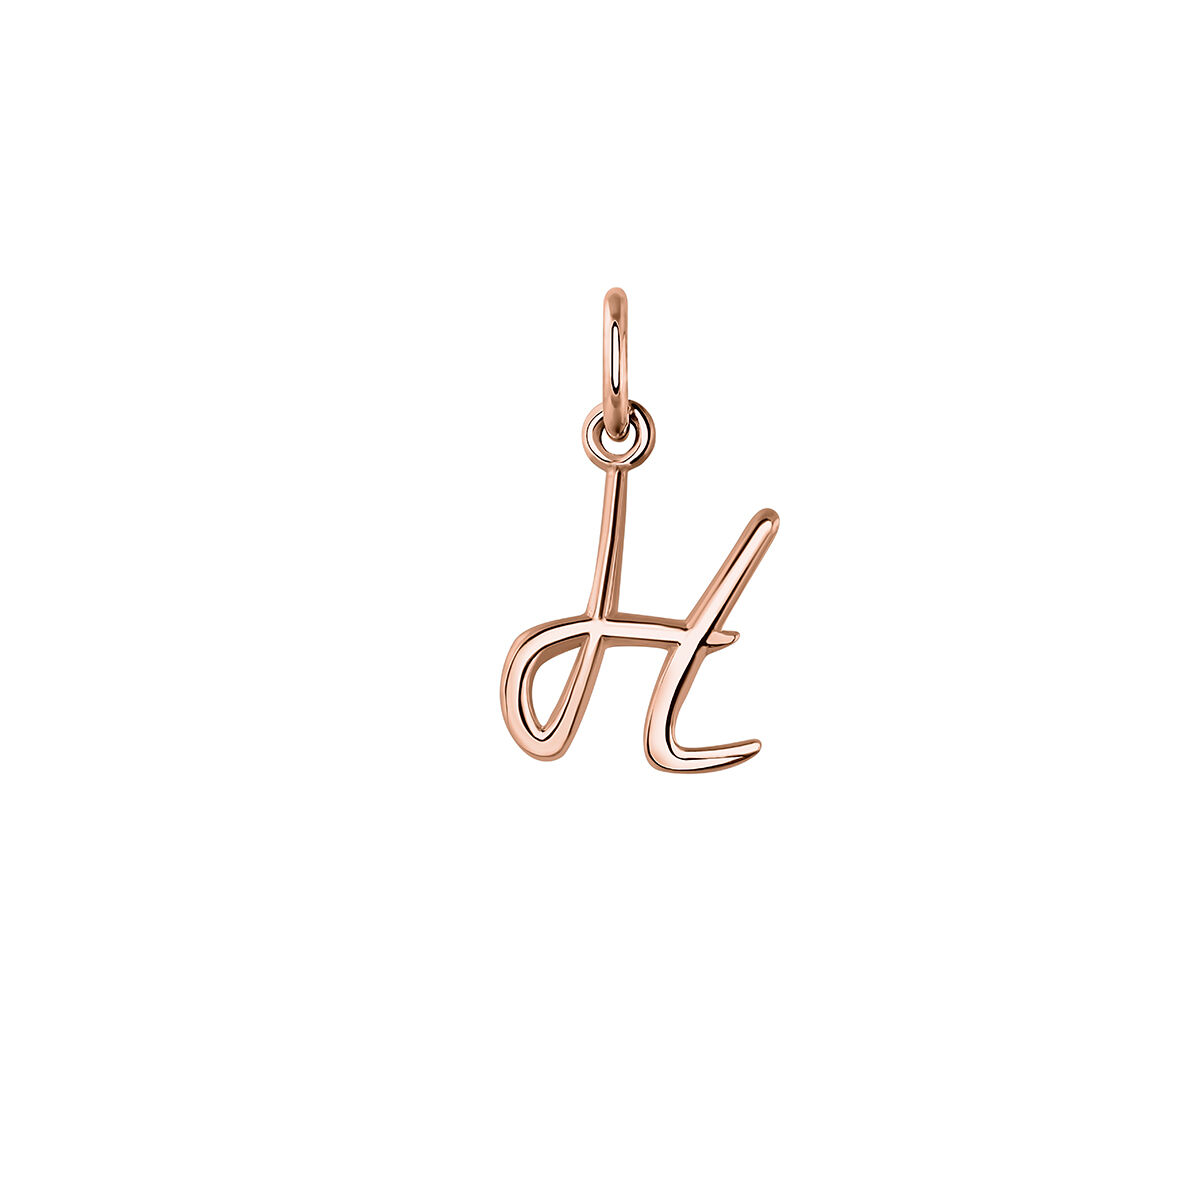 Rose gold-plated silver H initial charm  , J03932-03-H, hi-res